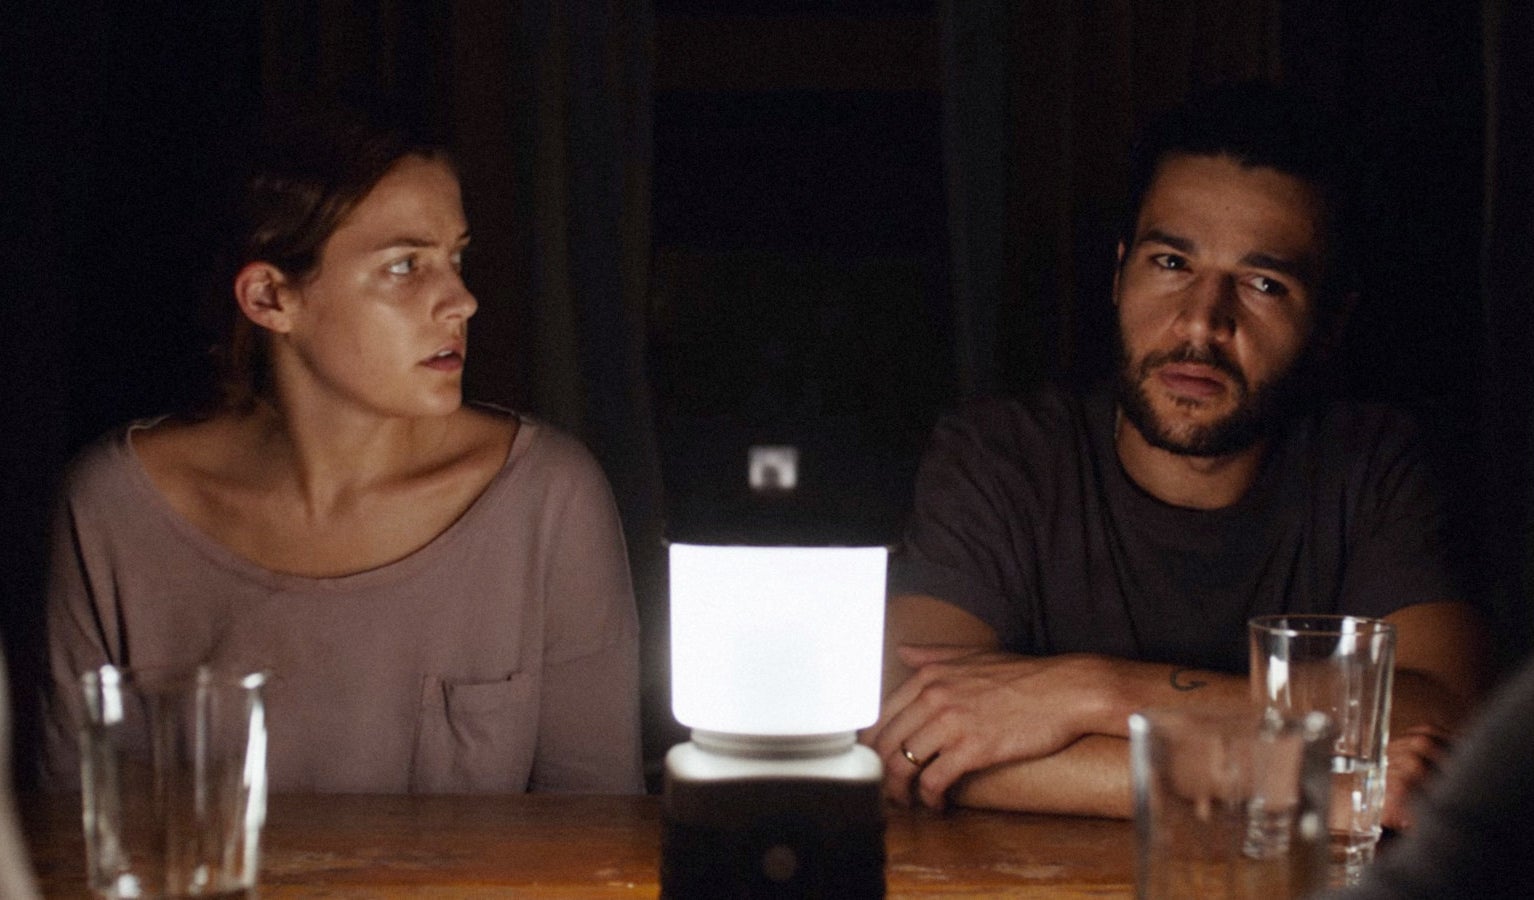 Riley Keough and Christopher Abbott sit at a table together with a camp light